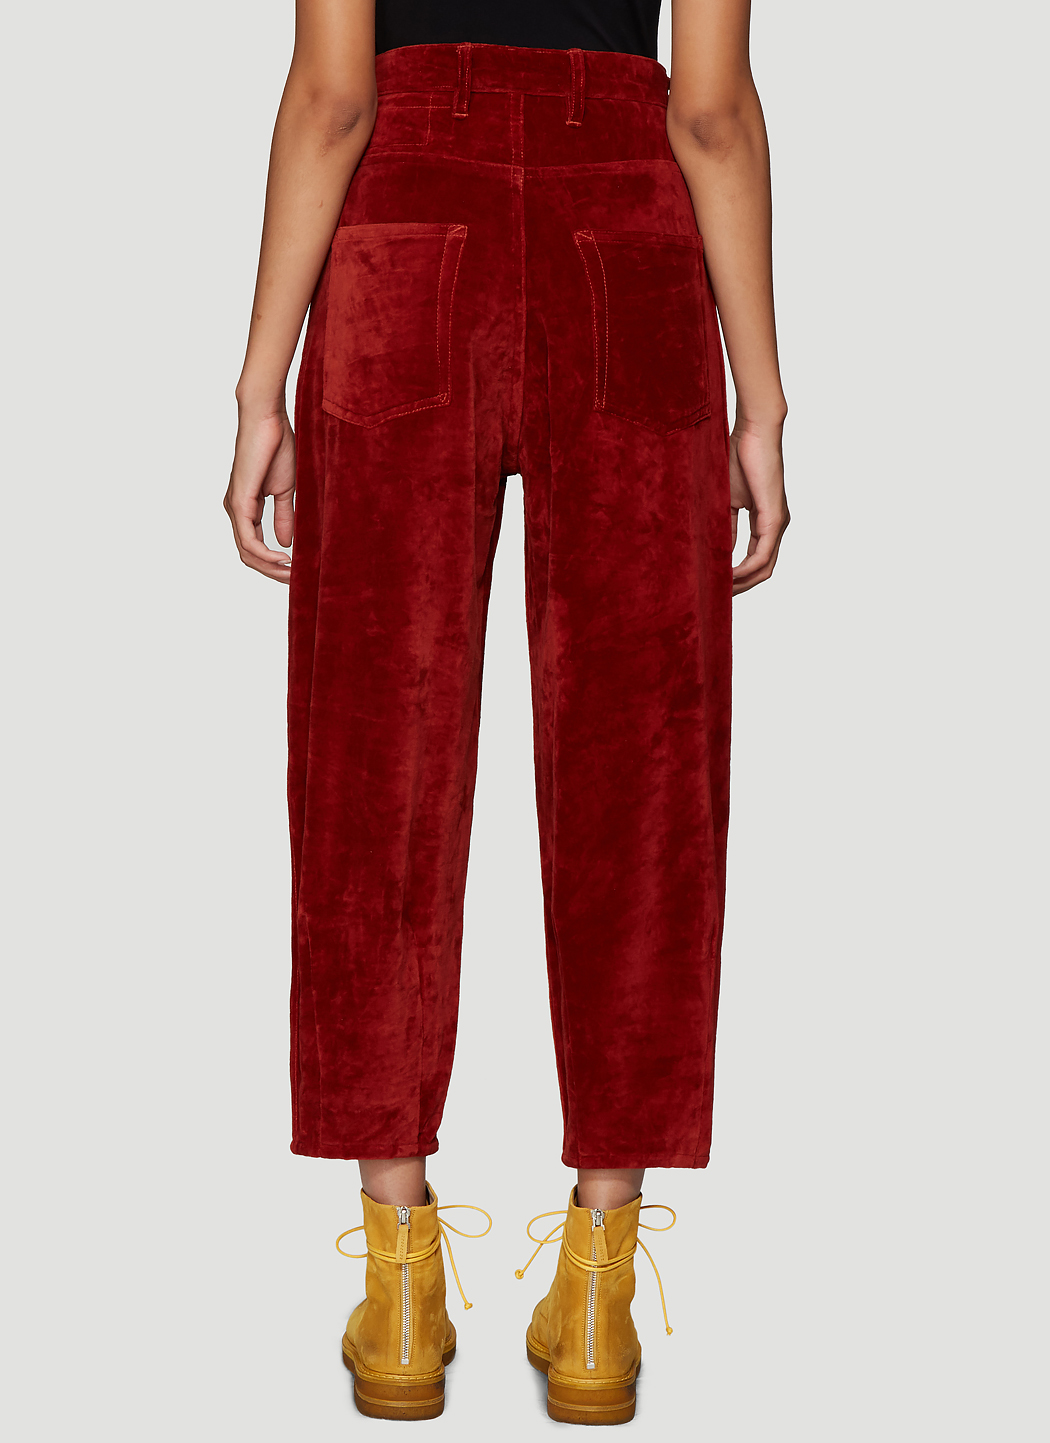 STORY mfg. Lush Jeans in Red | LN-CC